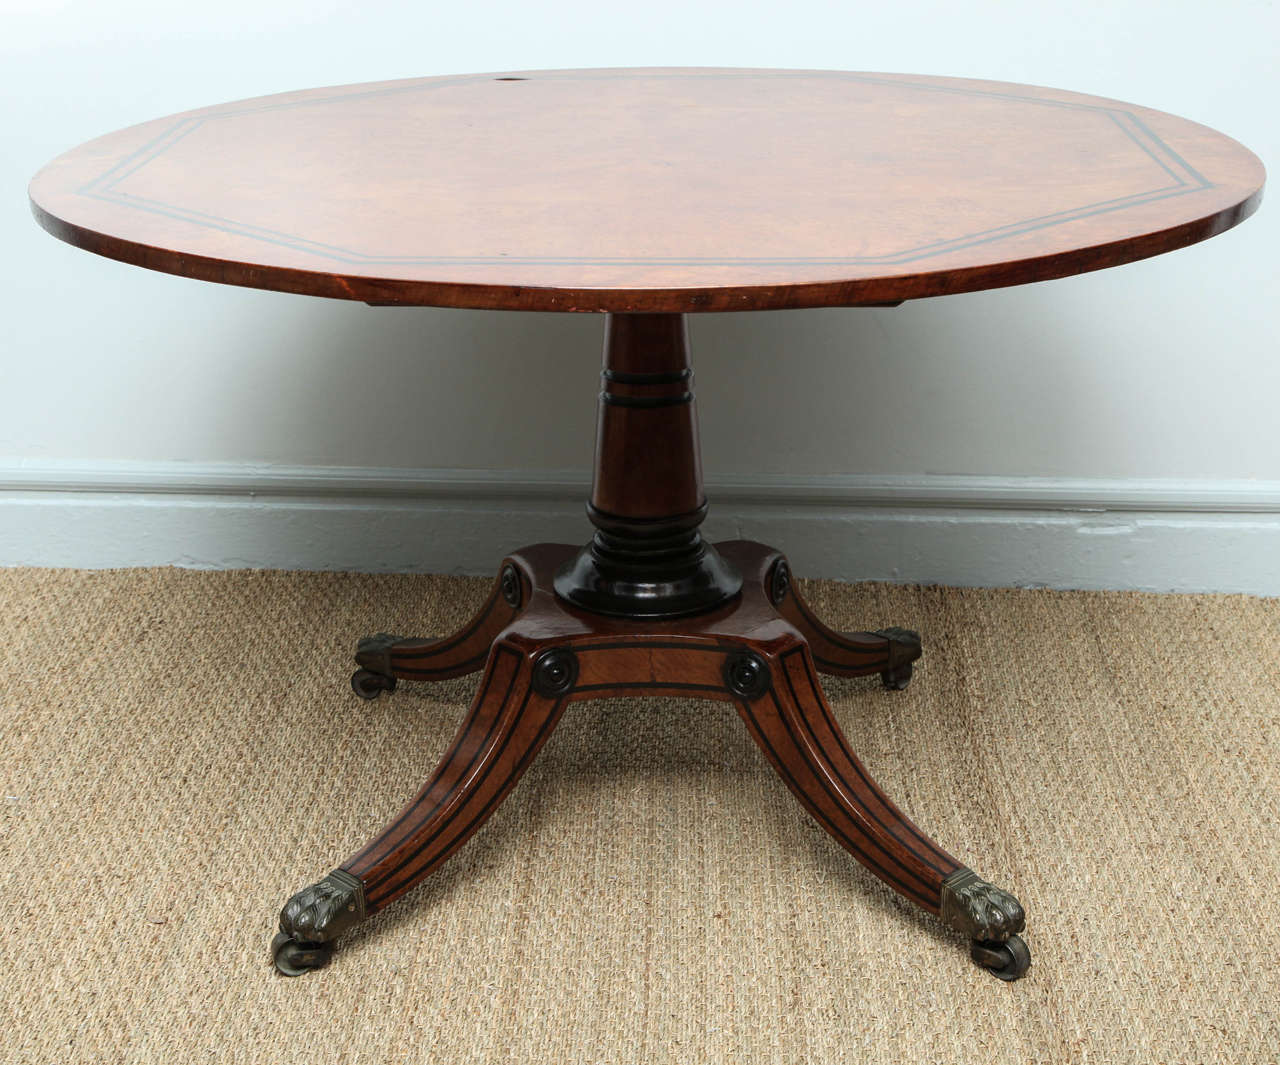 Highly figured ebony inlaid burr oak circular breakfast table in the manner (and attributable to) George Bullock, the top with book matched veneer and two stripes of ebony octagonal banding, the base of typical Egyptian  form with ebonized grooves